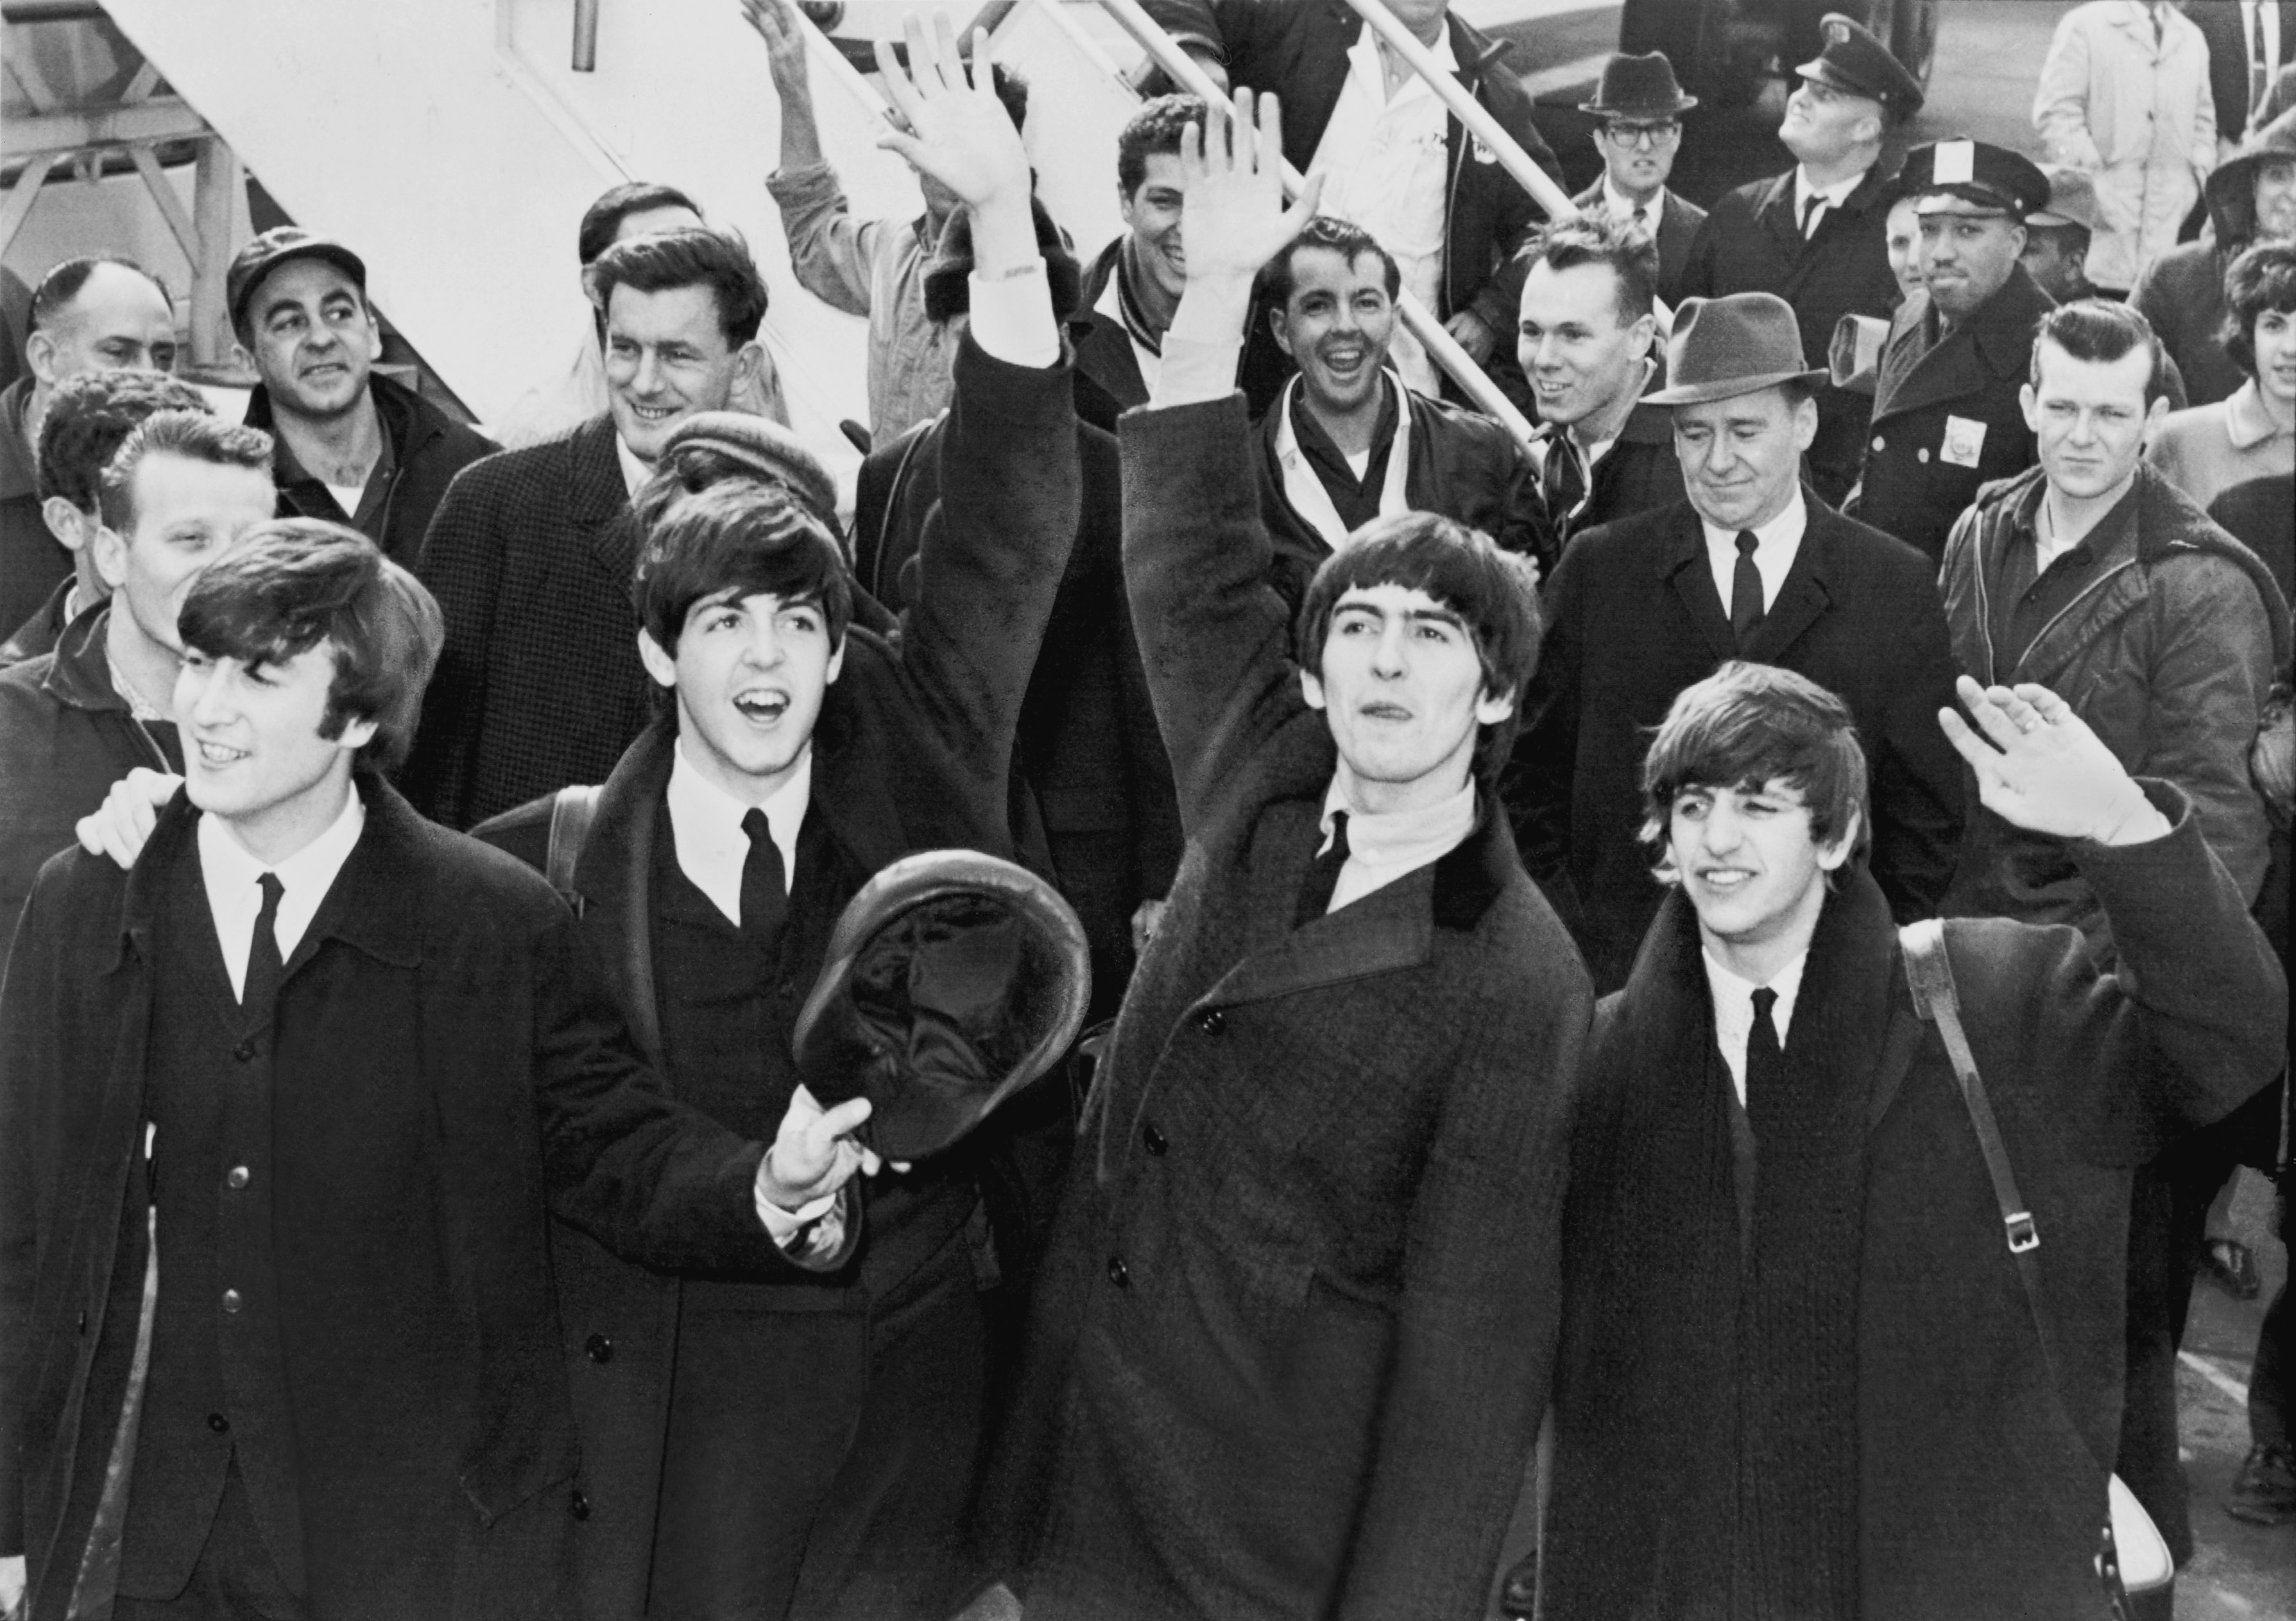 February 7, 1964: The Beatles Arrive in the United States